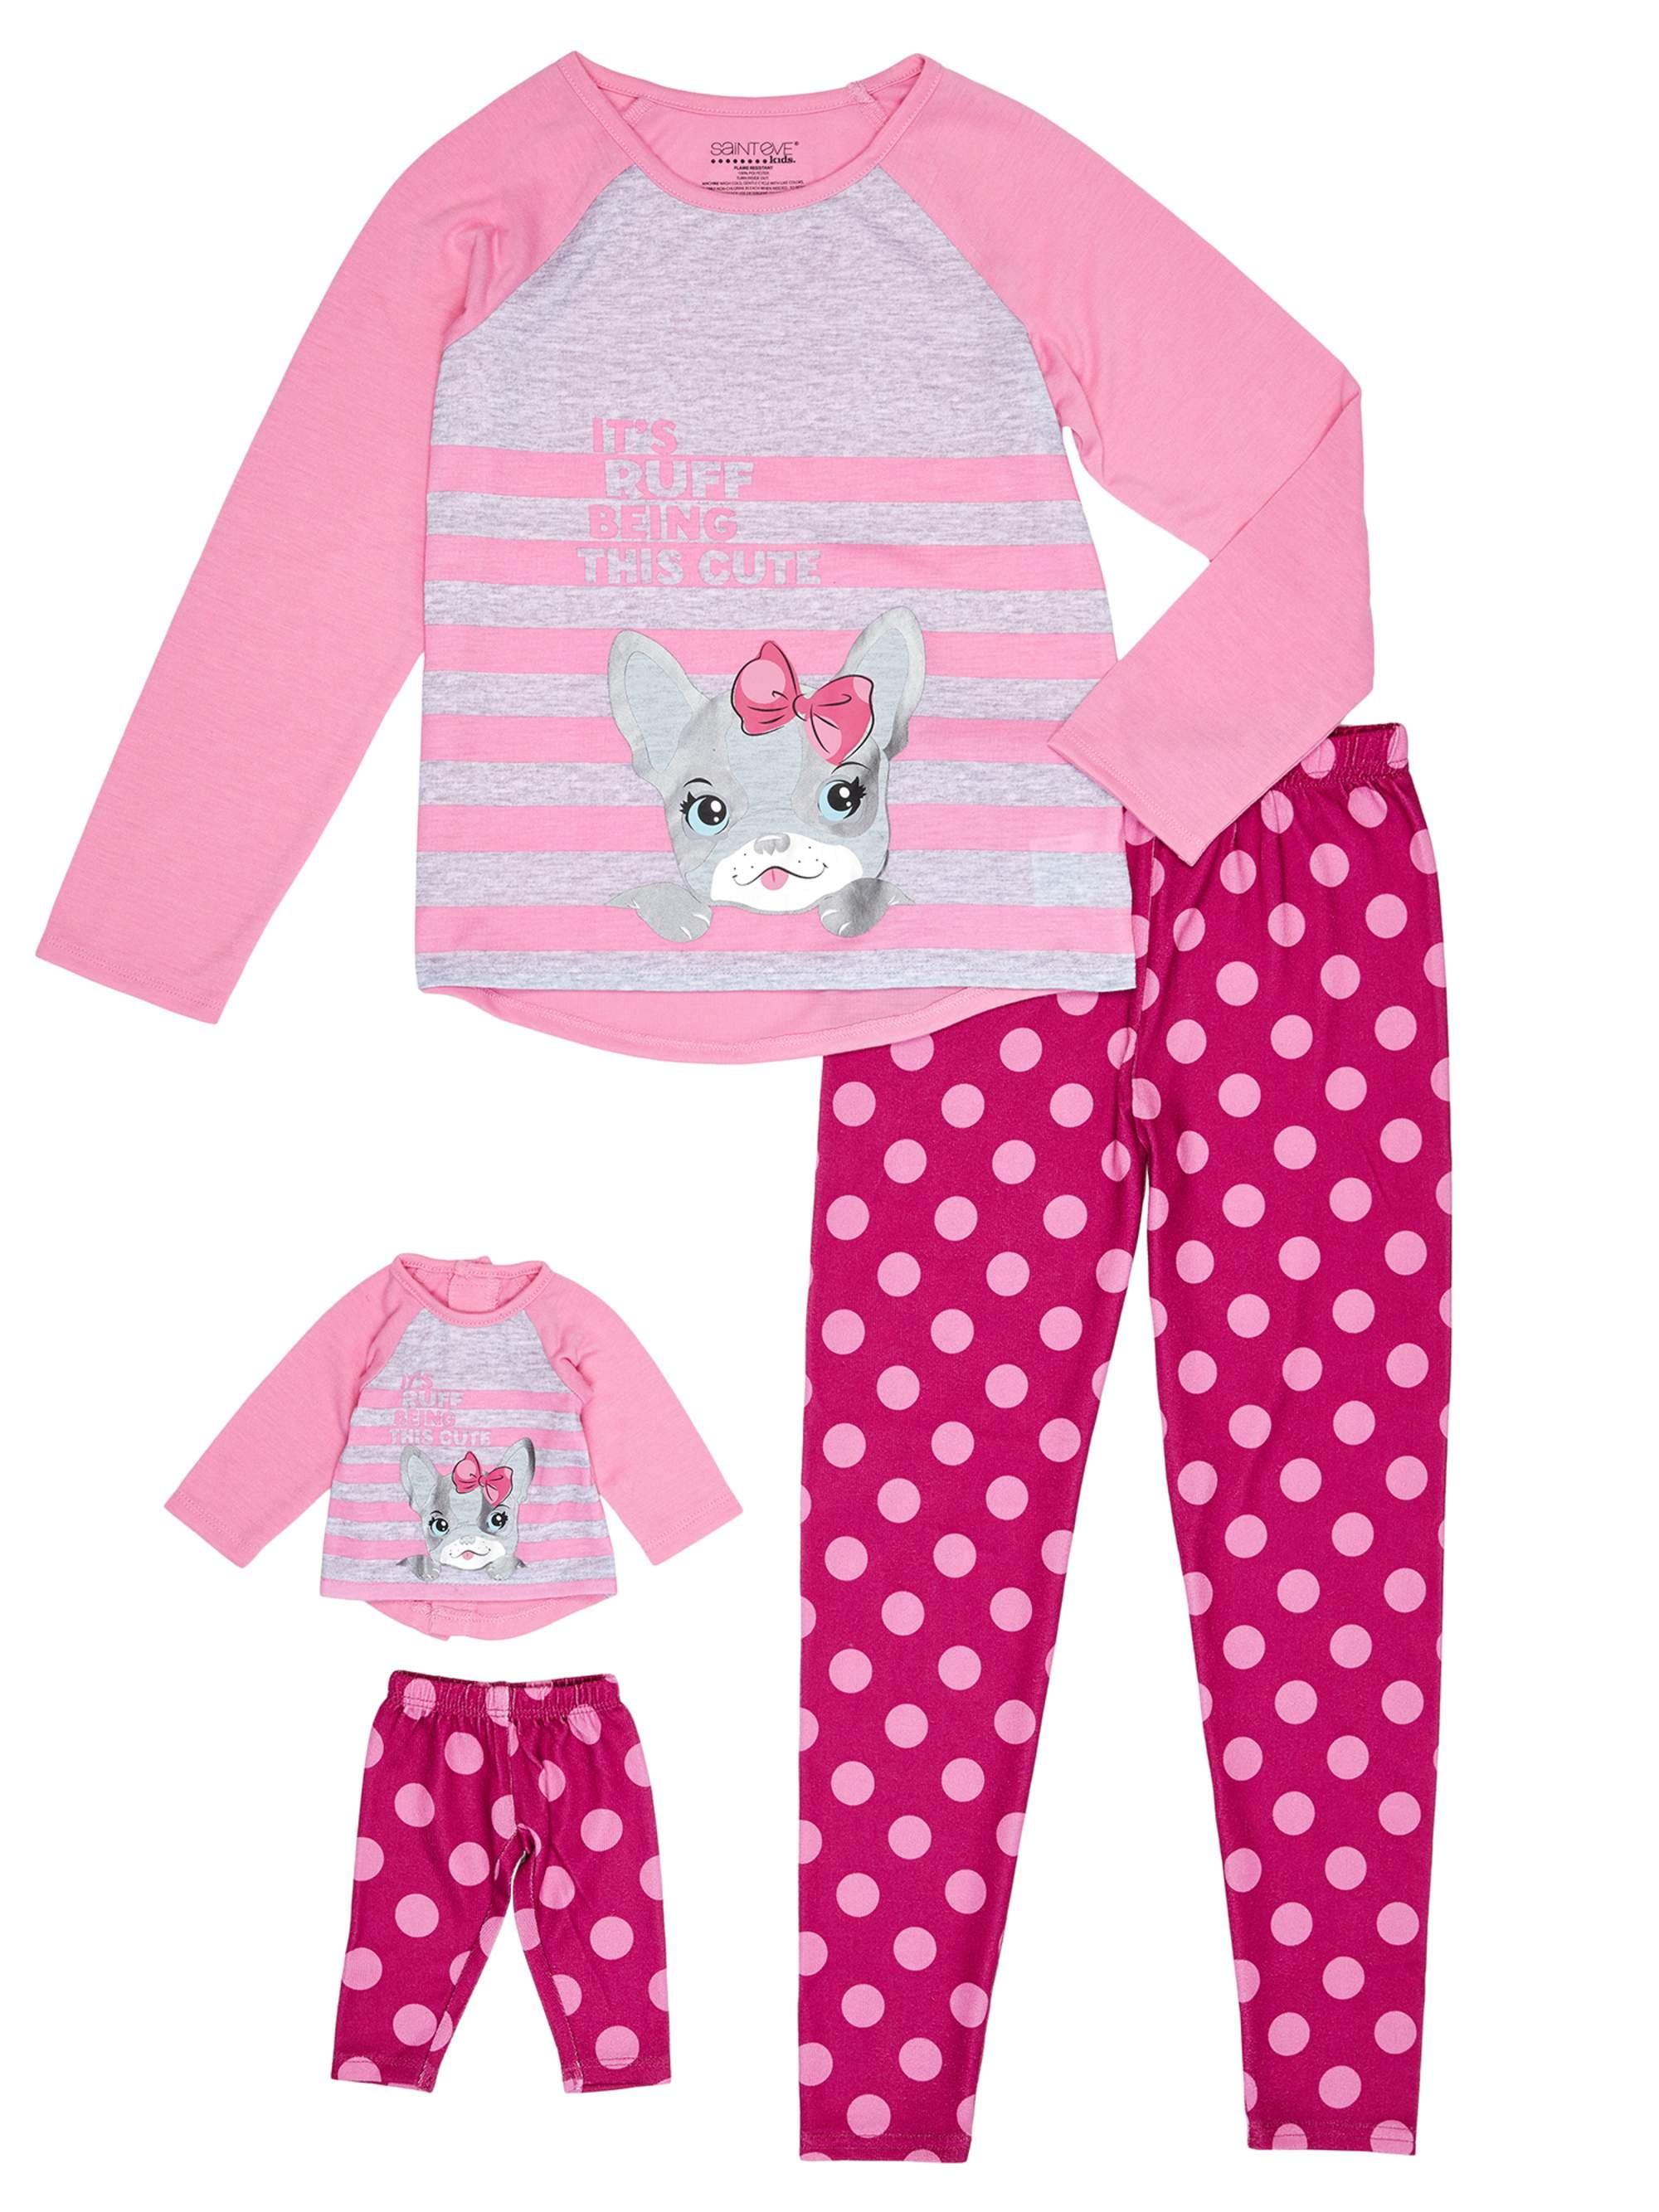 Dollie & Me Girls Cowl Neck Emoji Legging Set and Matching Doll Outfit Dress